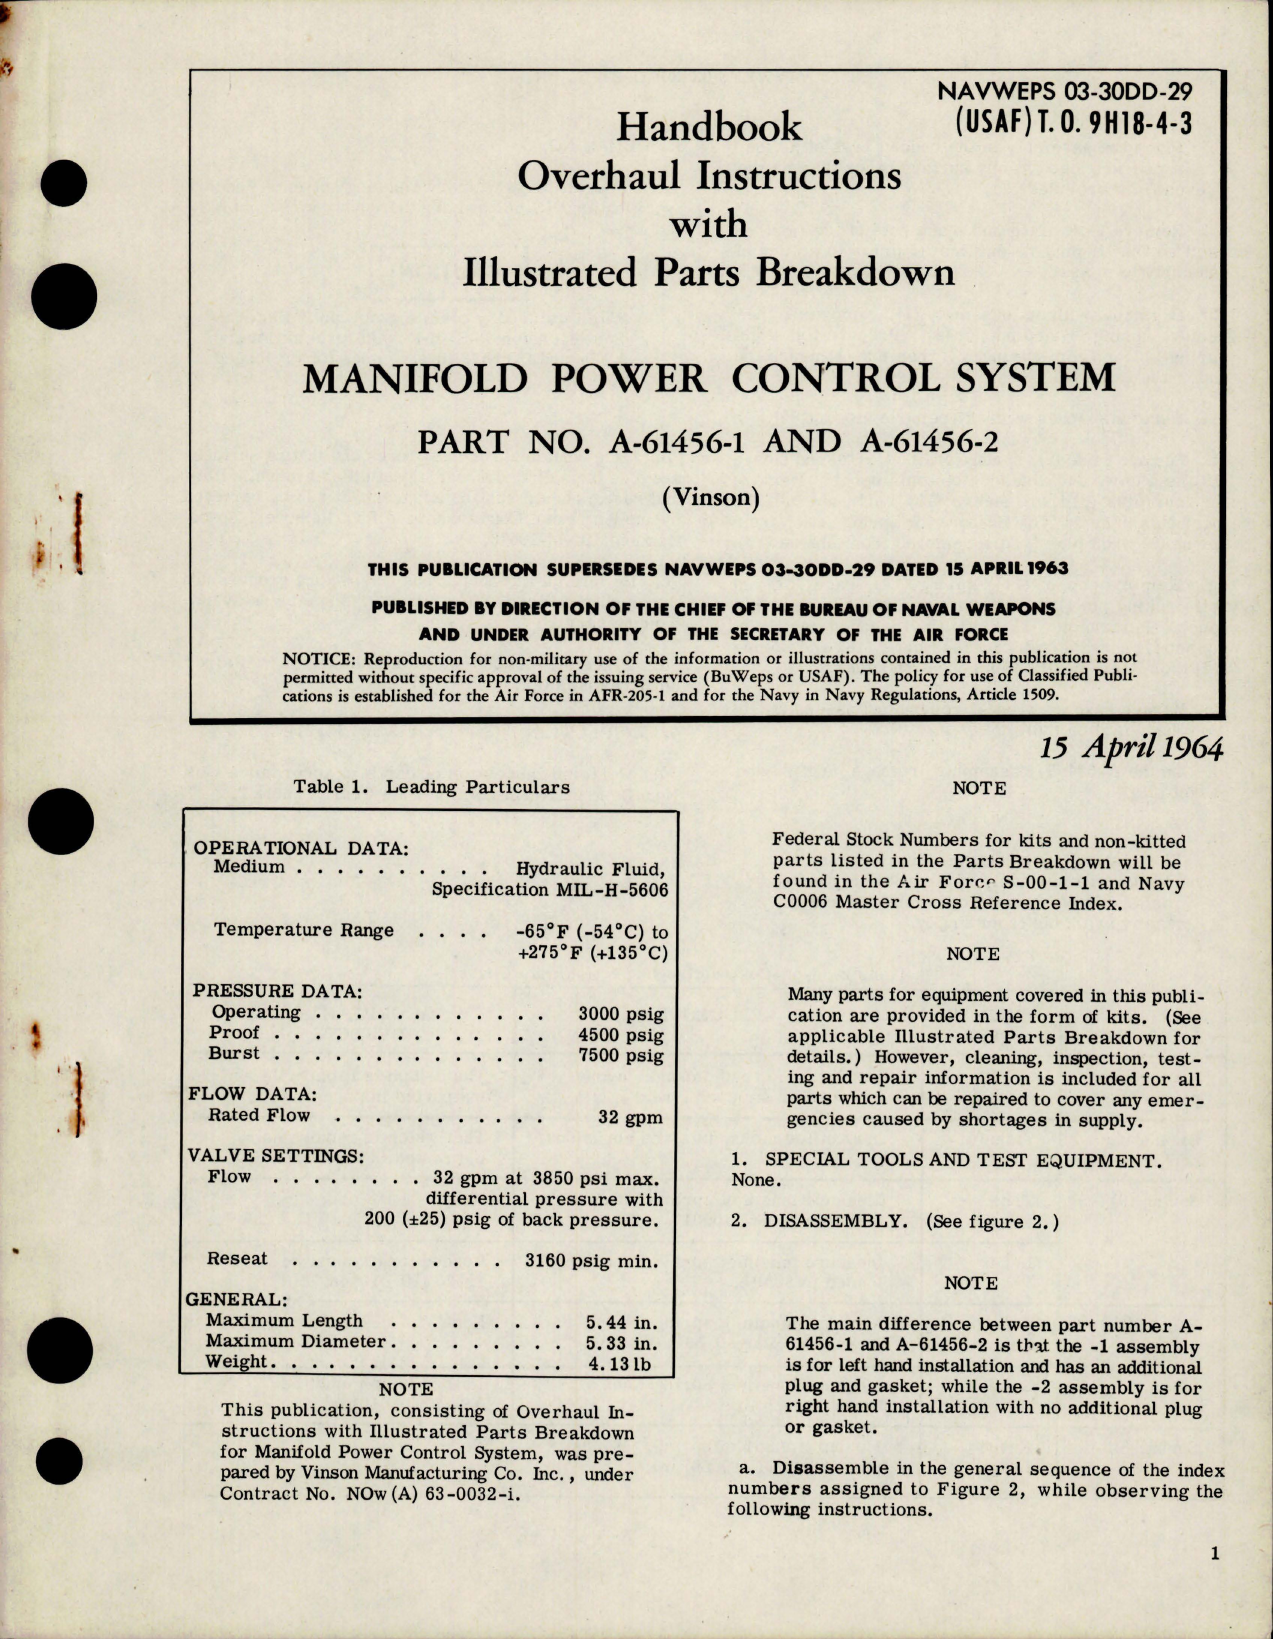 Sample page 1 from AirCorps Library document: Overhaul Instructions with Parts Breakdown for Manifold Power Control System - Part A-61456-1 and A-61456-2